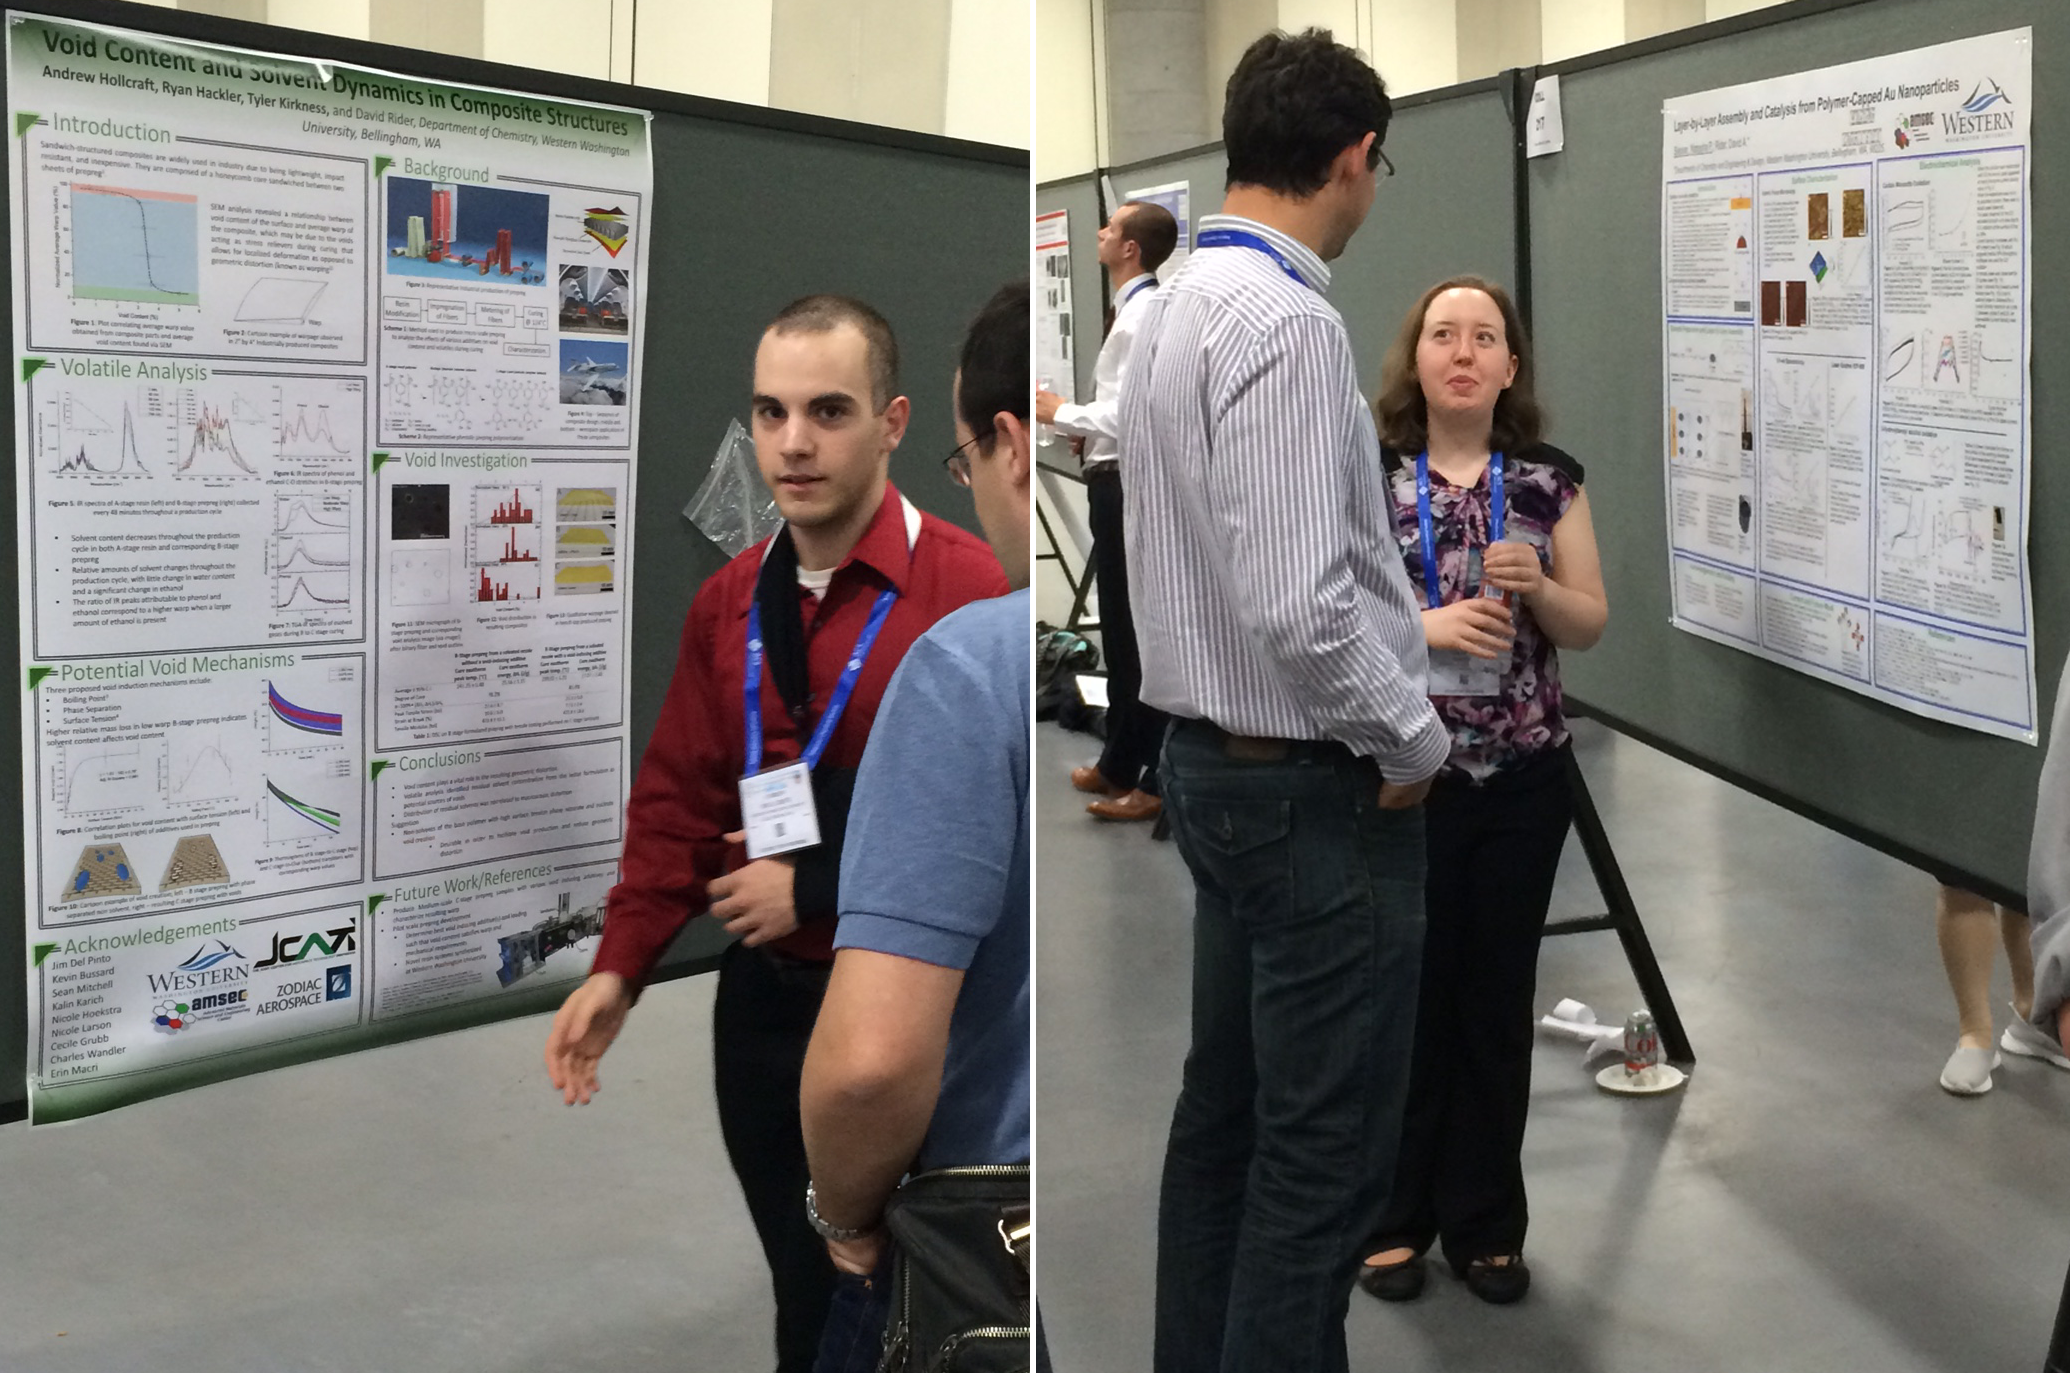 Students presenting academic posters